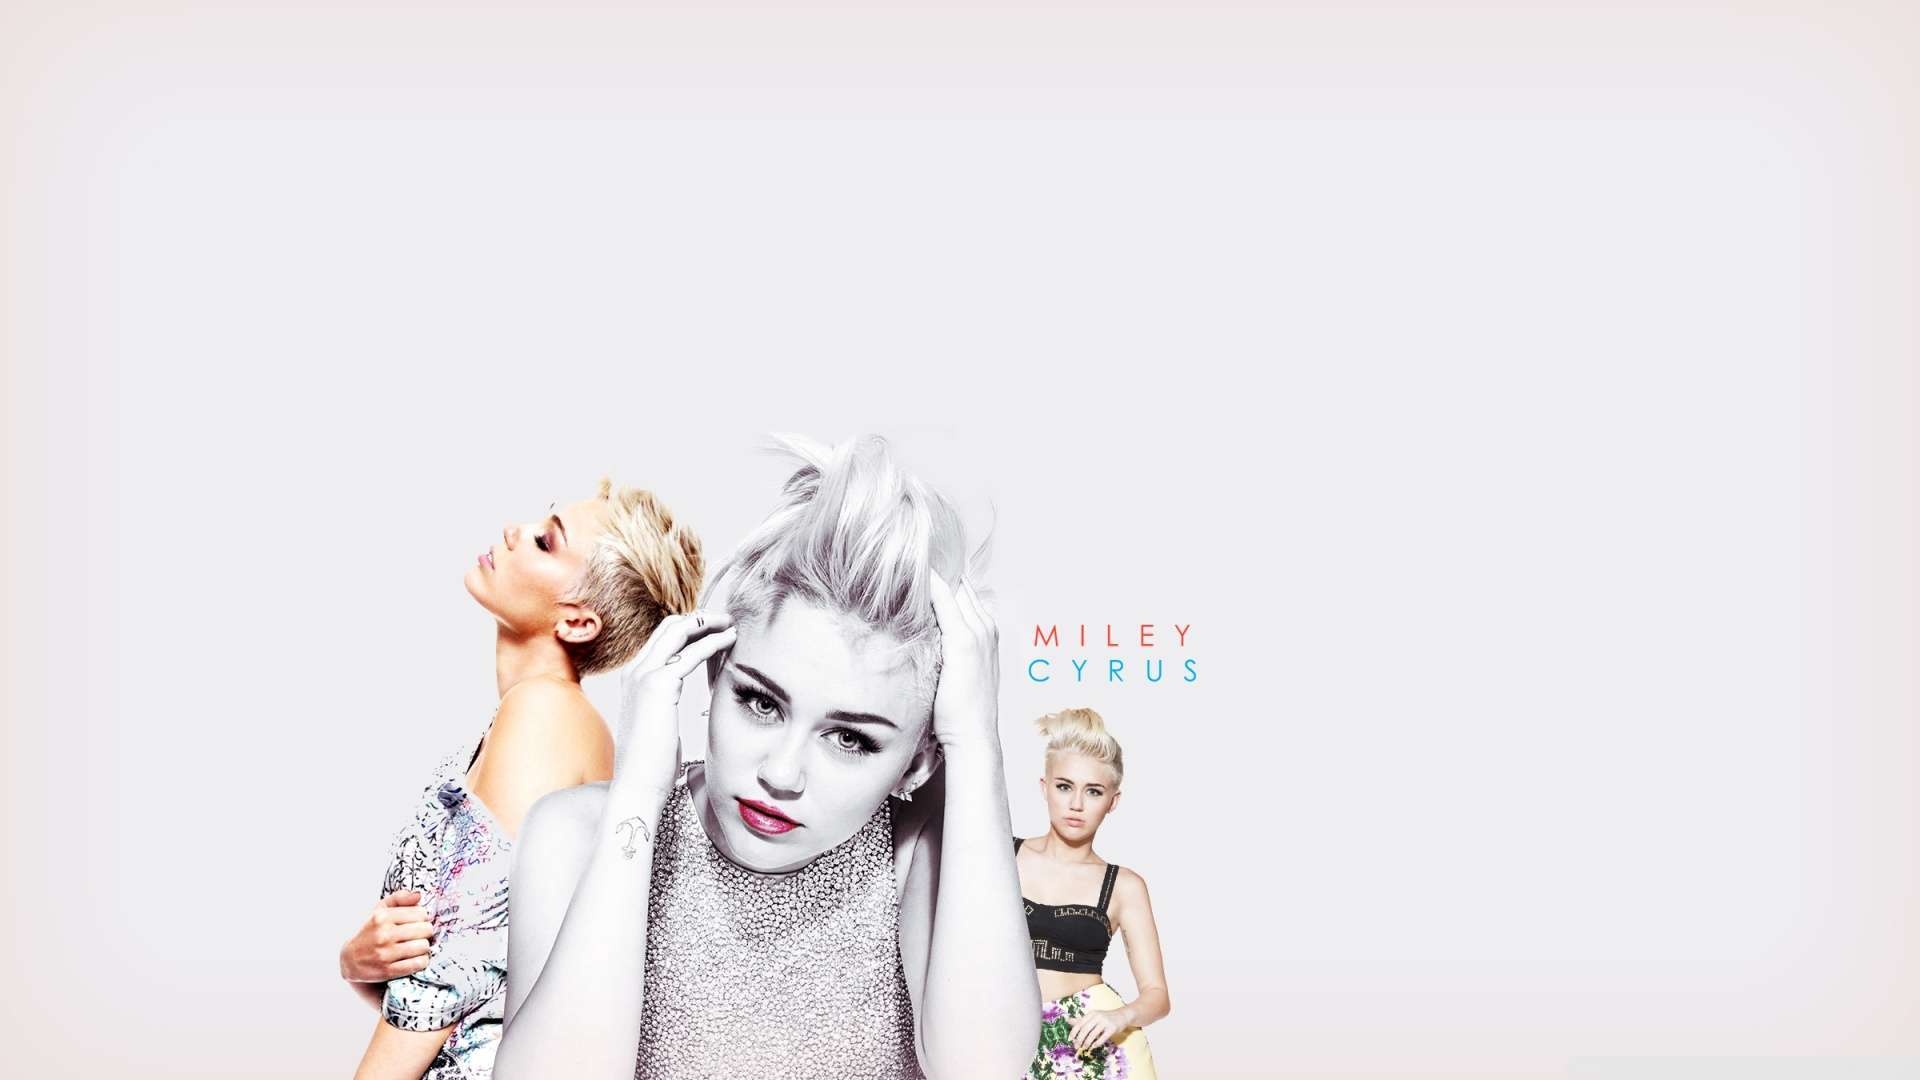 Wallpaper Miley Cyrus 1080p HD Upload At February